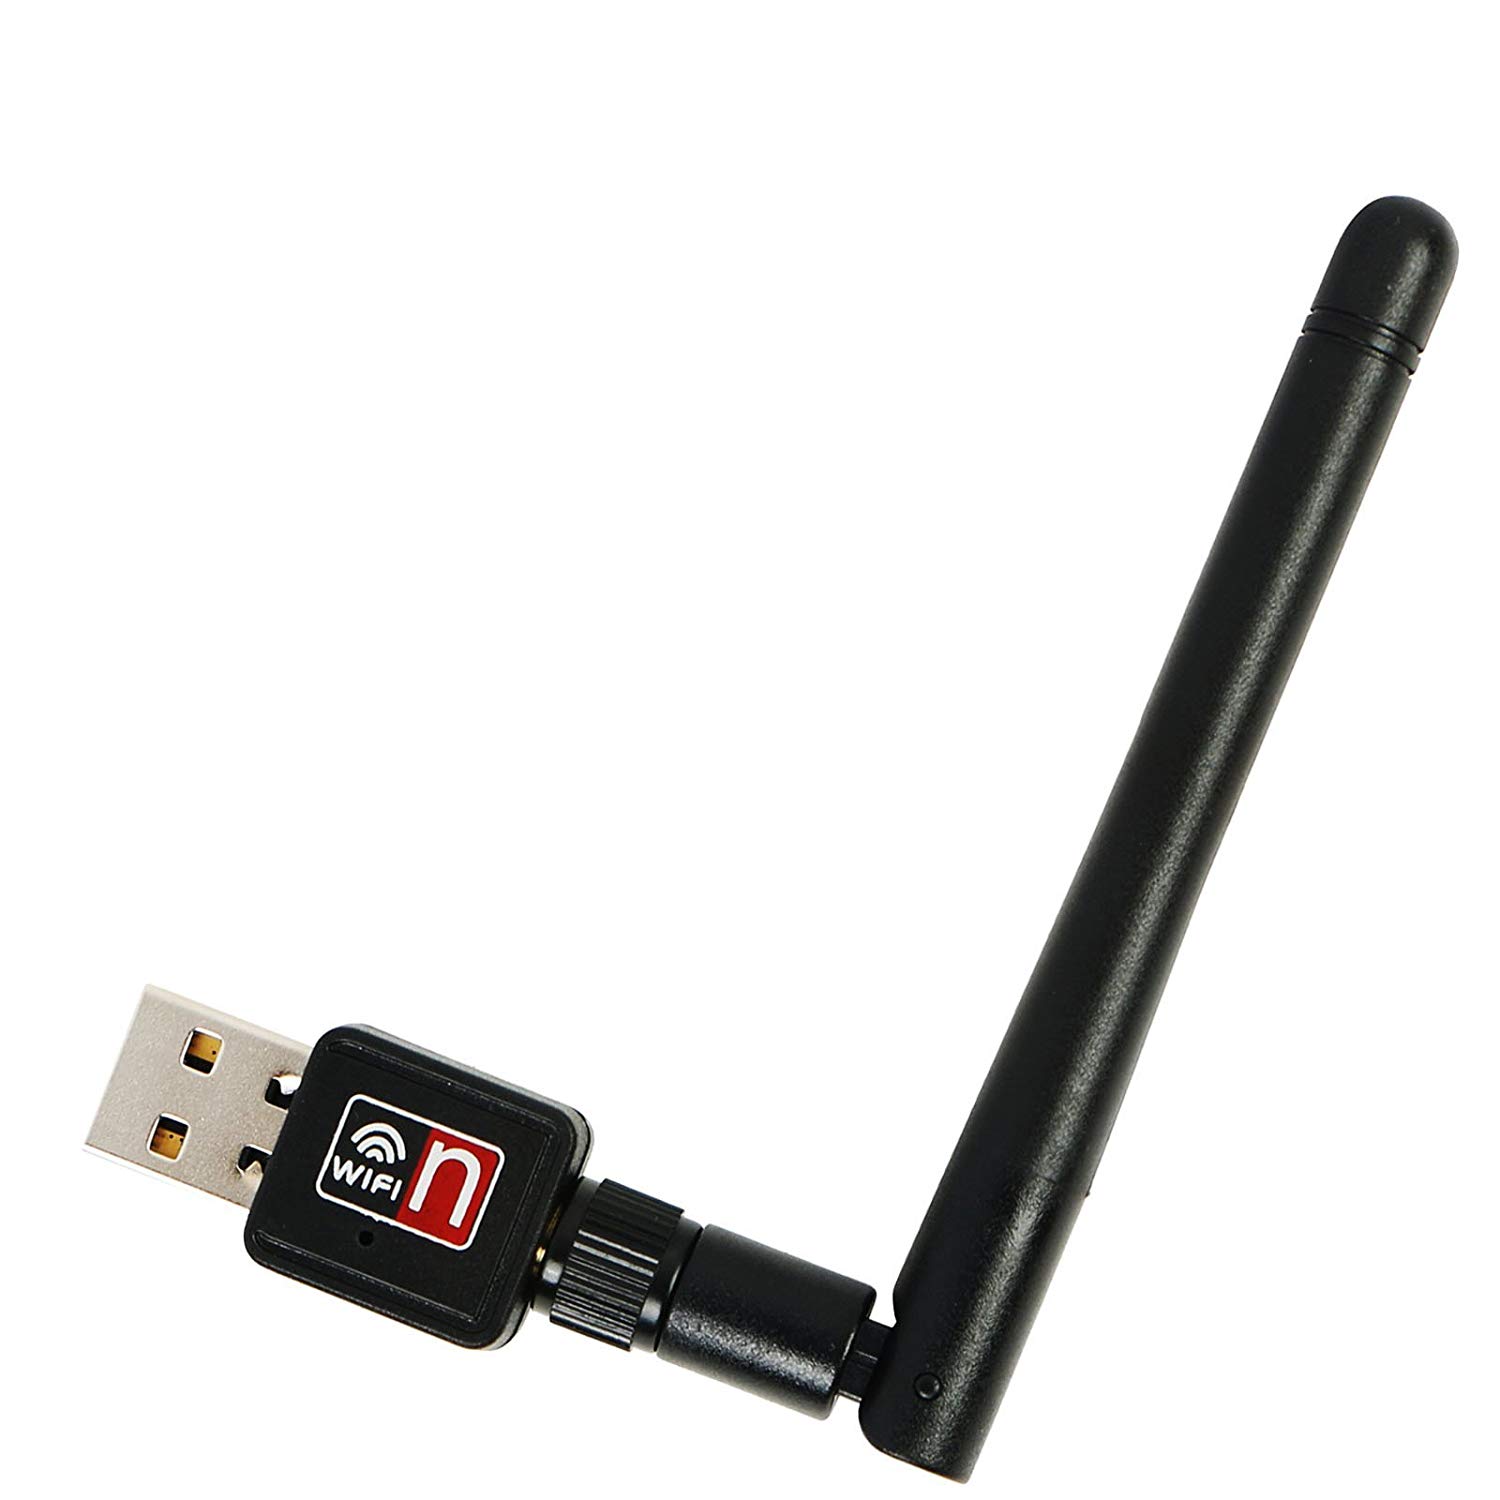 Usb Wifi 802 11n Adapter With Antenna Black Computer Wale